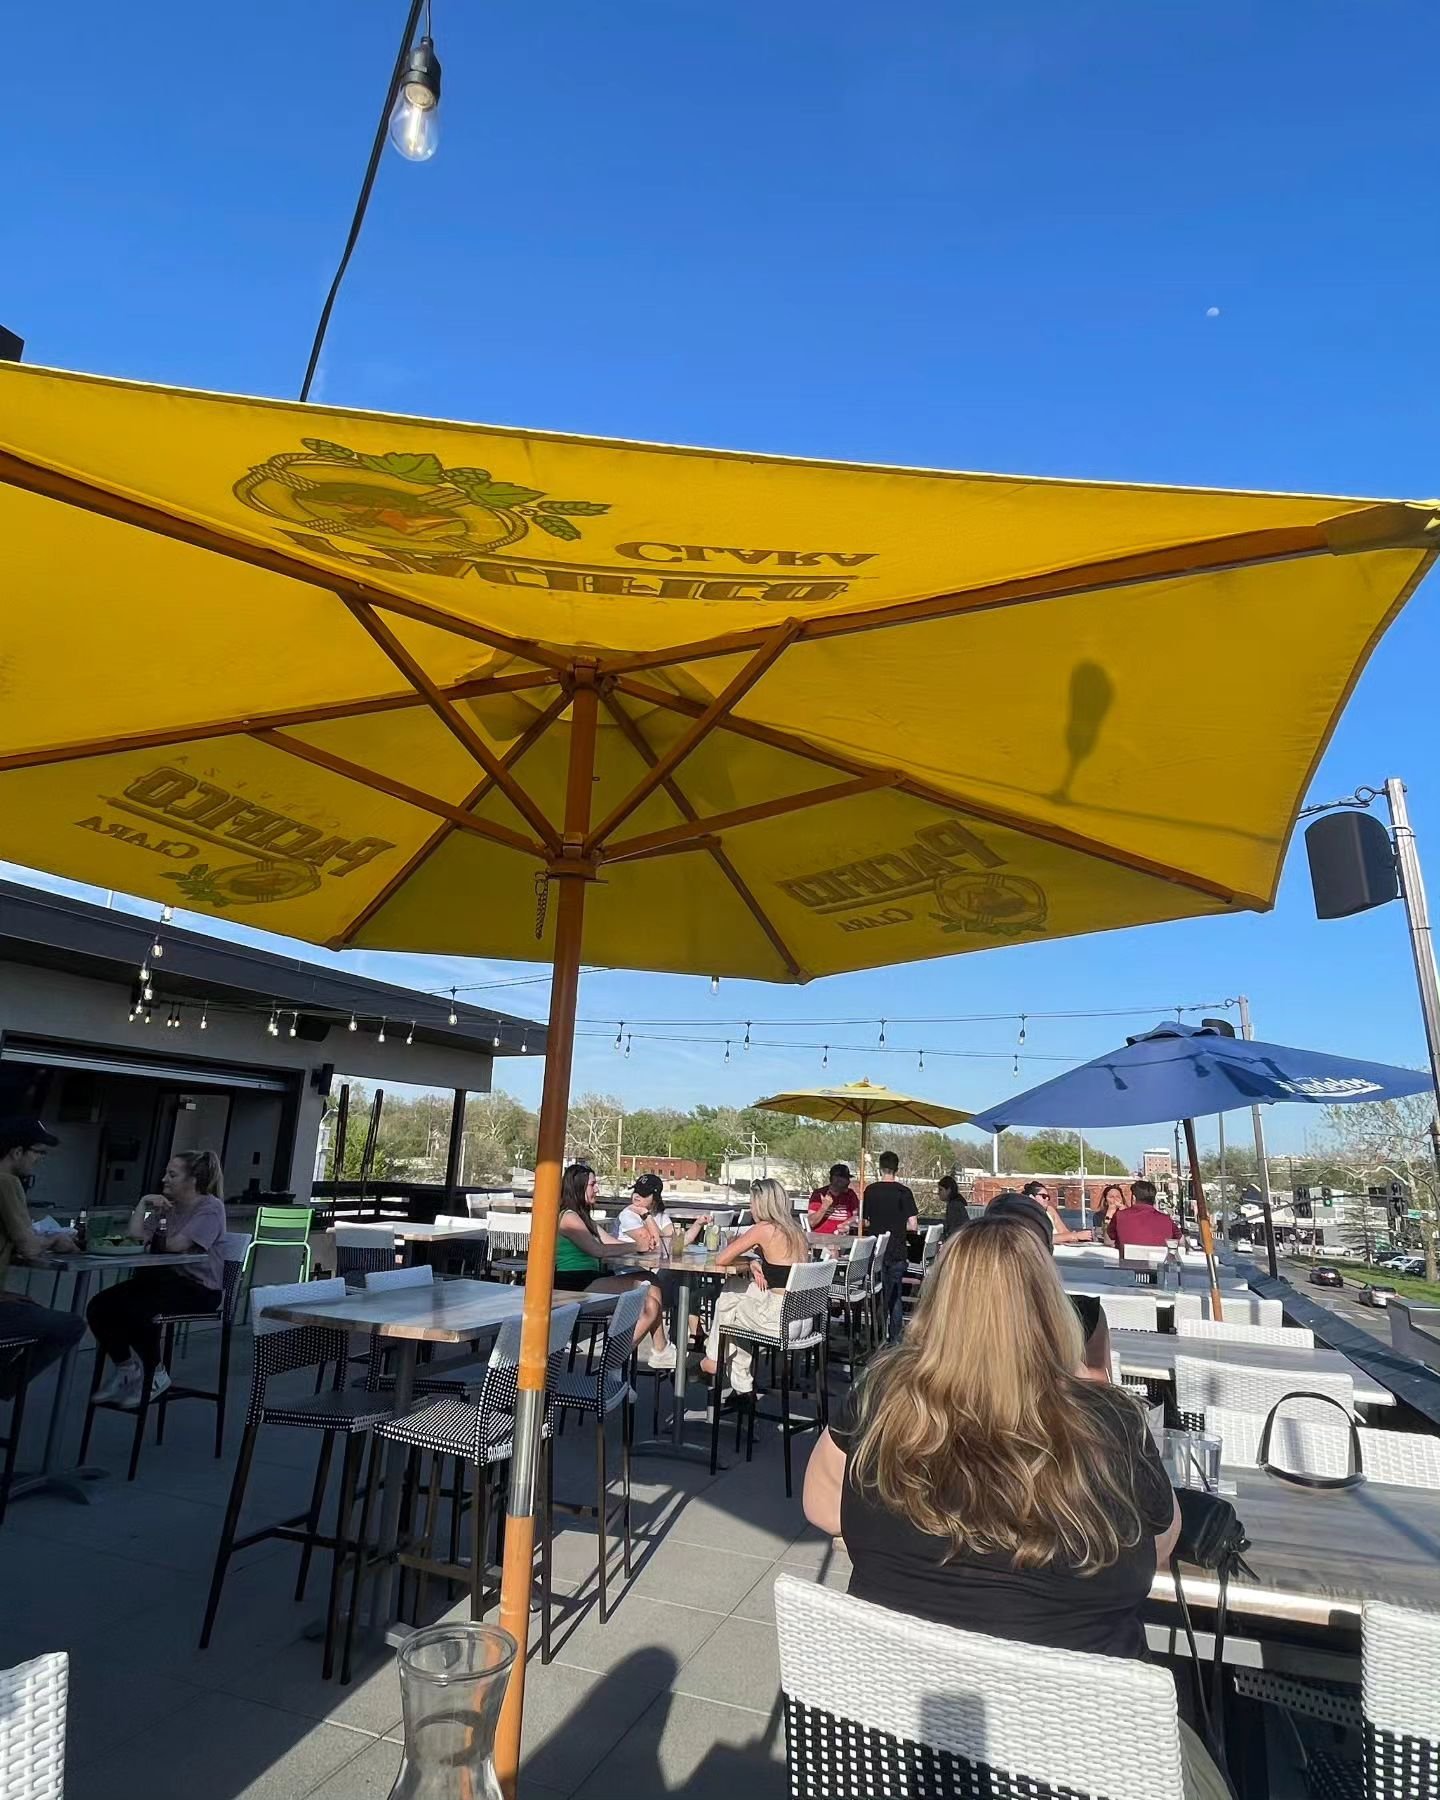 Step up to the rooftop at Barrio Taqueria for amazing views and unbeatable flavors!&nbsp;🌇&nbsp; It's the perfect place to relax after a long day!

📸&nbsp;@kcplates